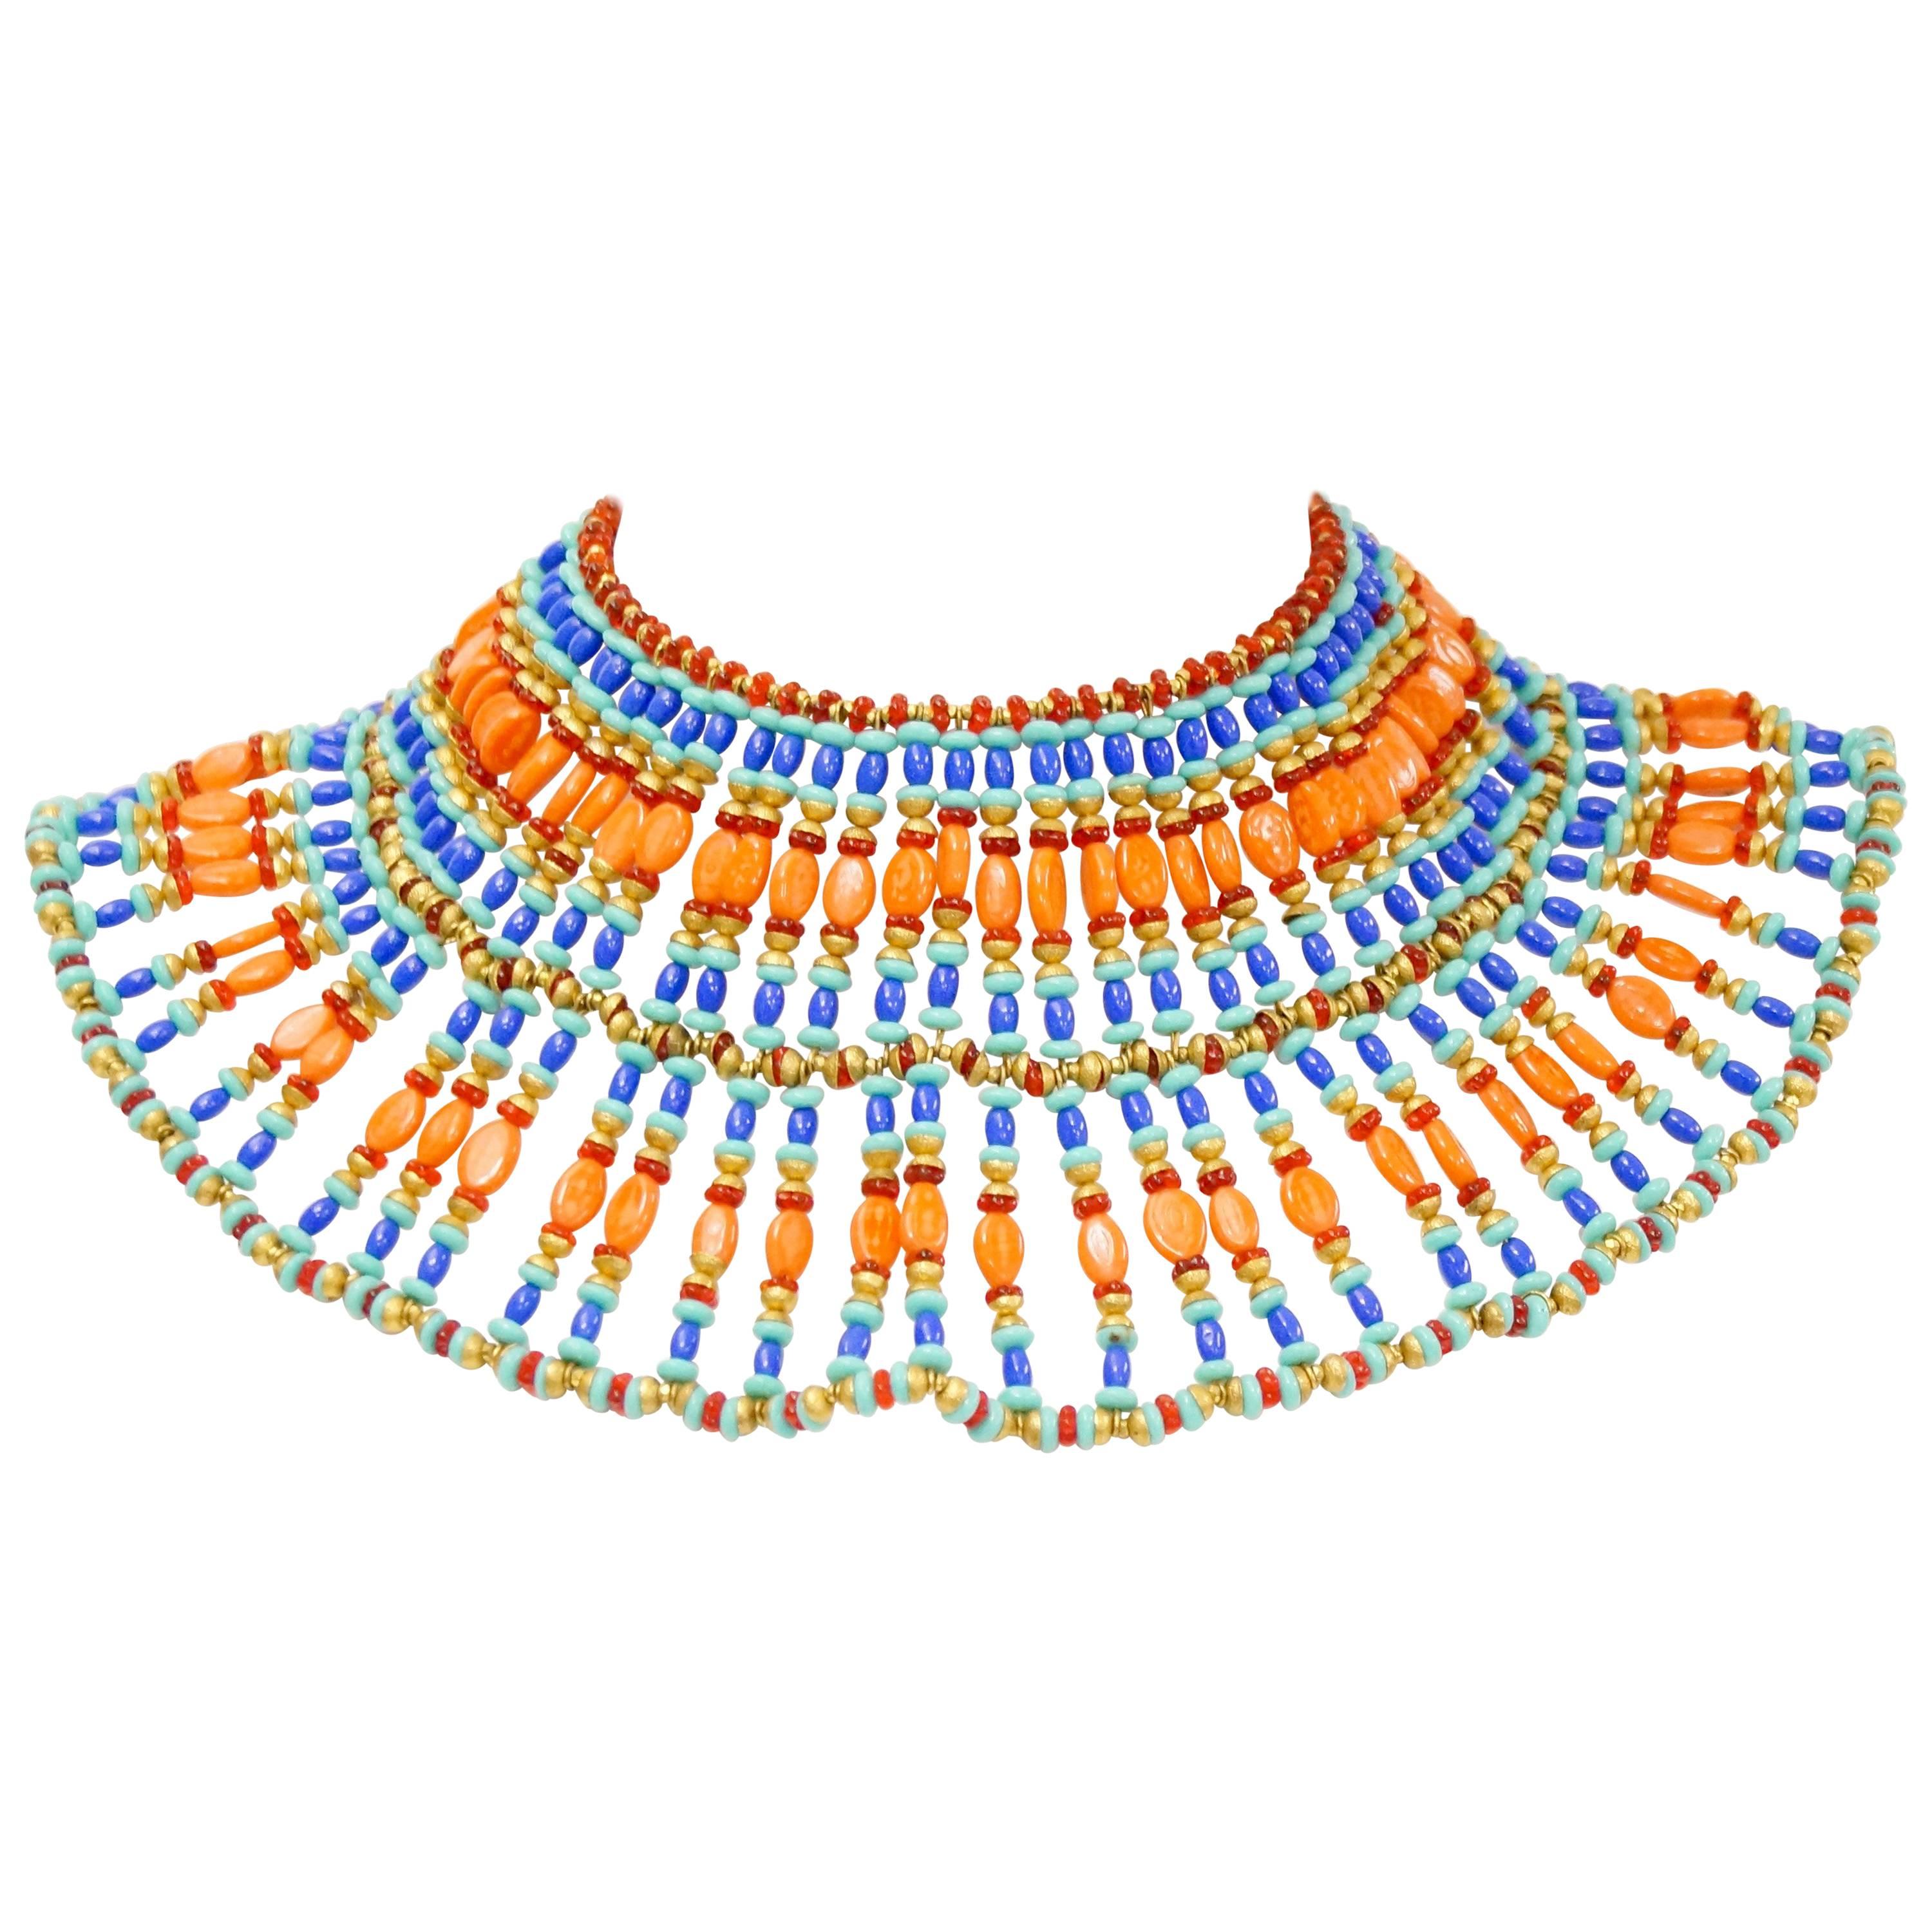  Miriam Haskell Egyptian Revival Choker Necklace by Vrba, 1970s NWT  For Sale